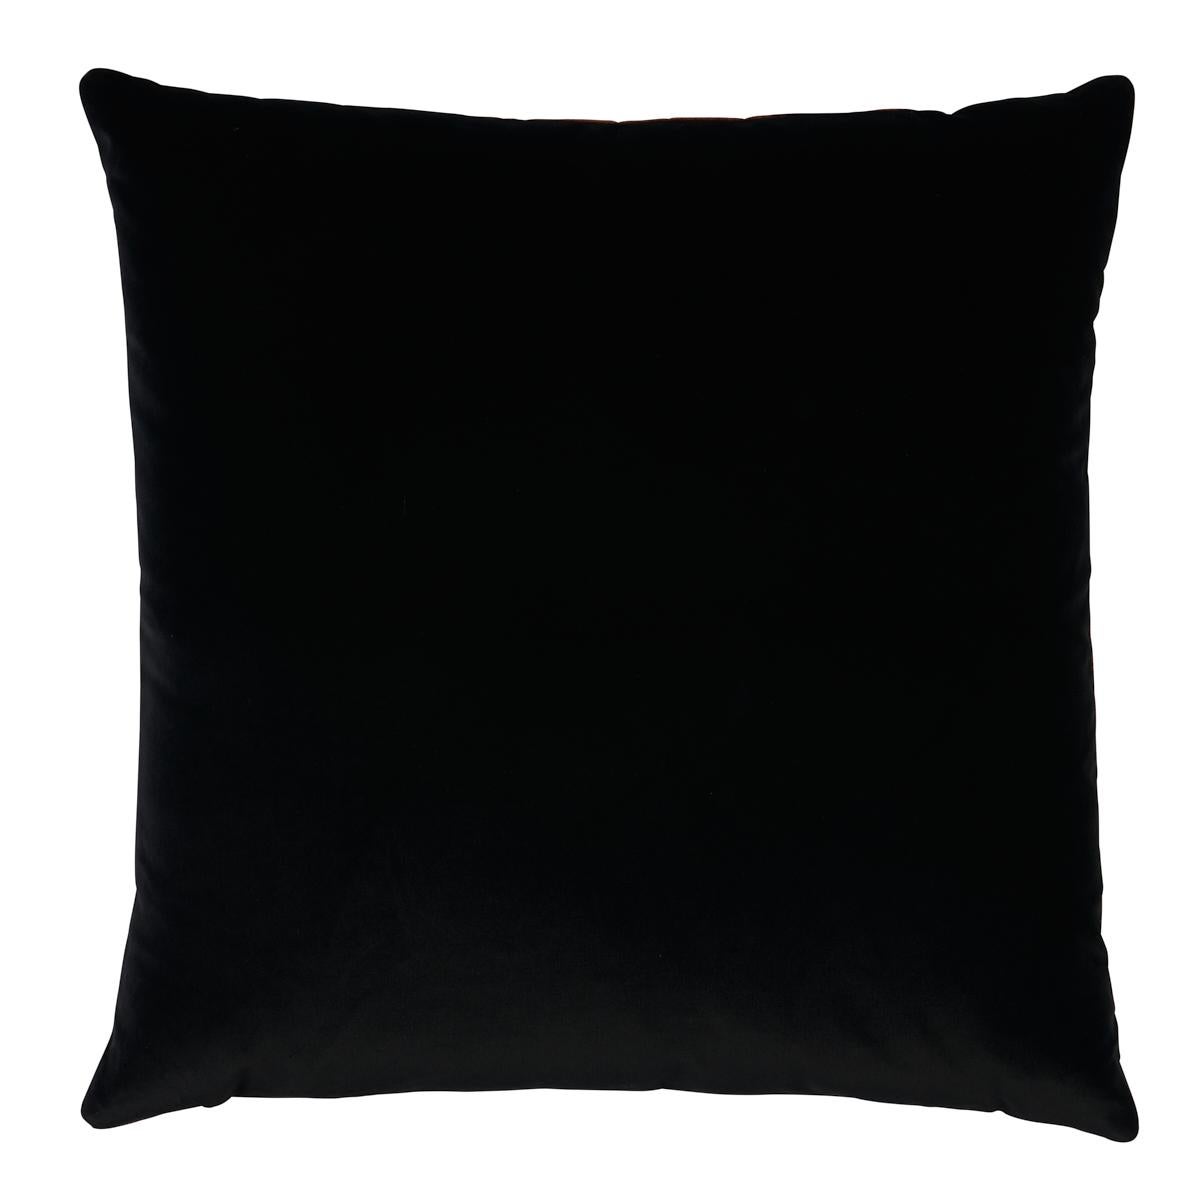 This pillow features Sabi Tiger Velvet with a knife edge finish. Sabi Tiger Stripe in java is a wildly chic abstract animal pattern and a go-to fabric that traverses decorative styles. Back of pillow is Gainsborough Velvet. Pillow includes a